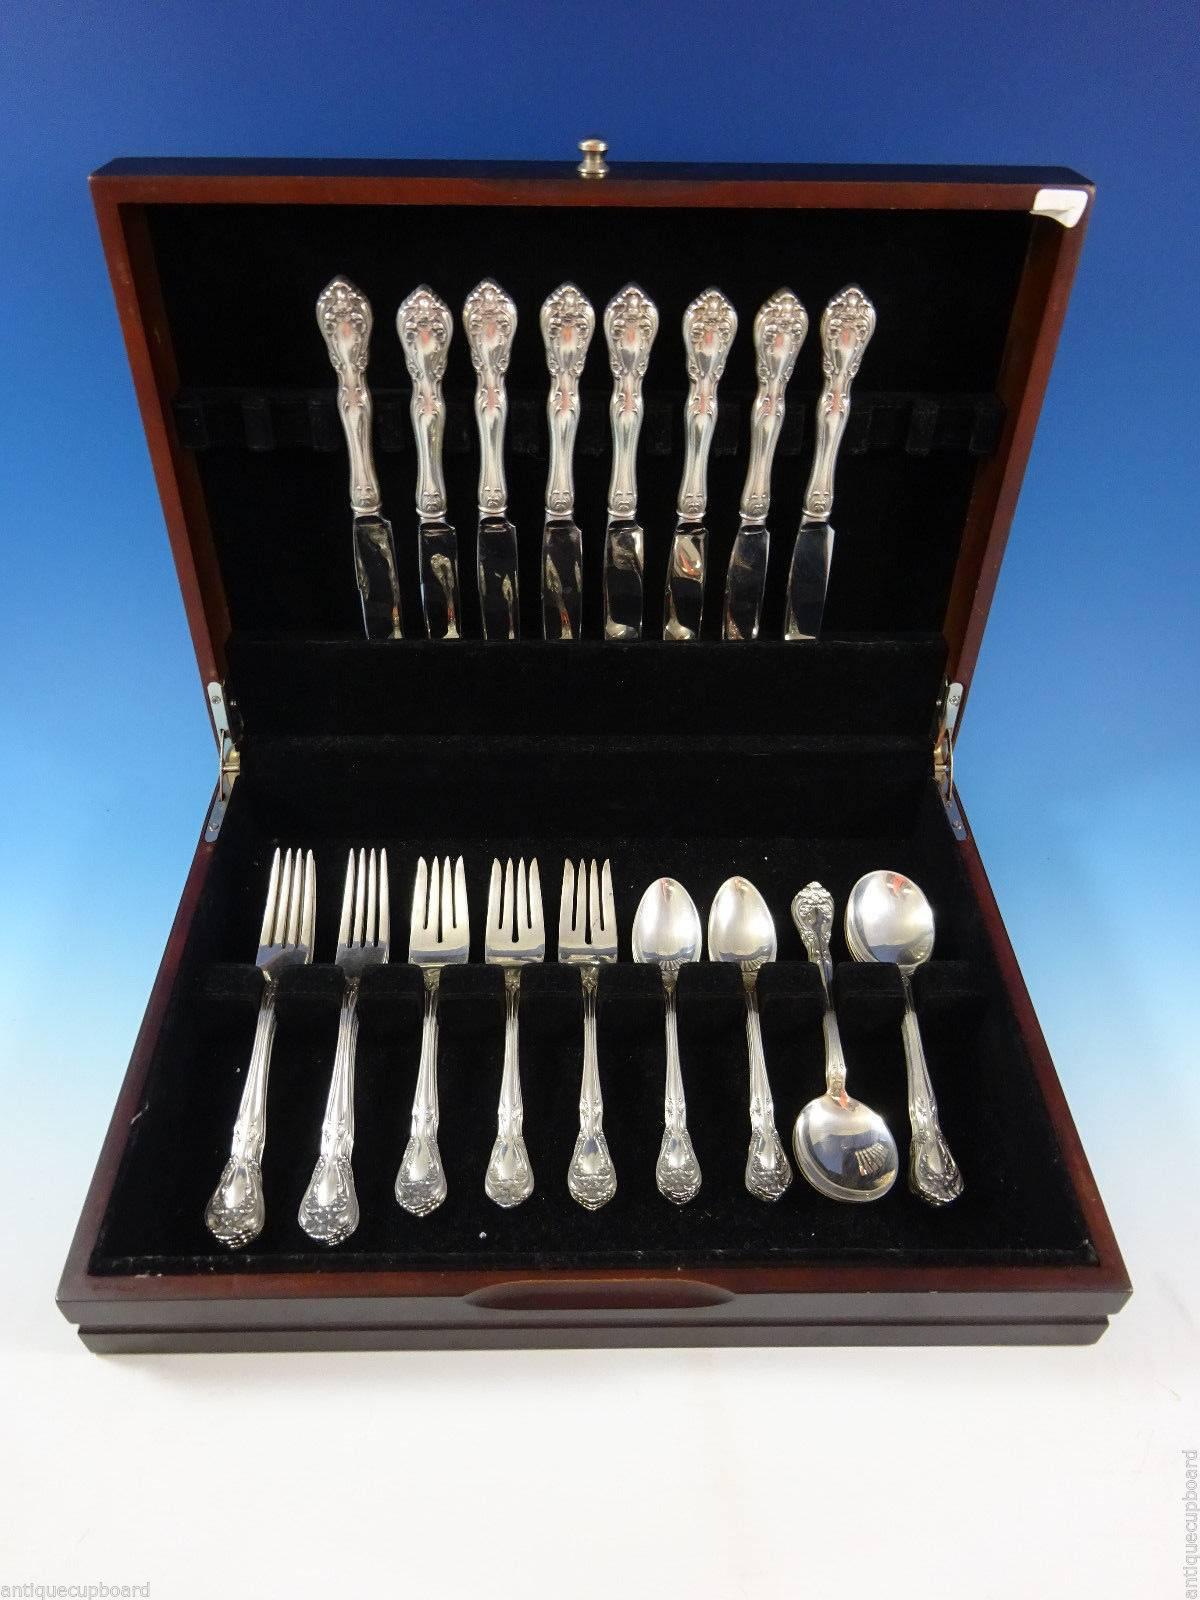 Chateau Rose by Alvin sterling silver flatware set, 40 pieces. This set includes: 

Eight knives, 8 7/8